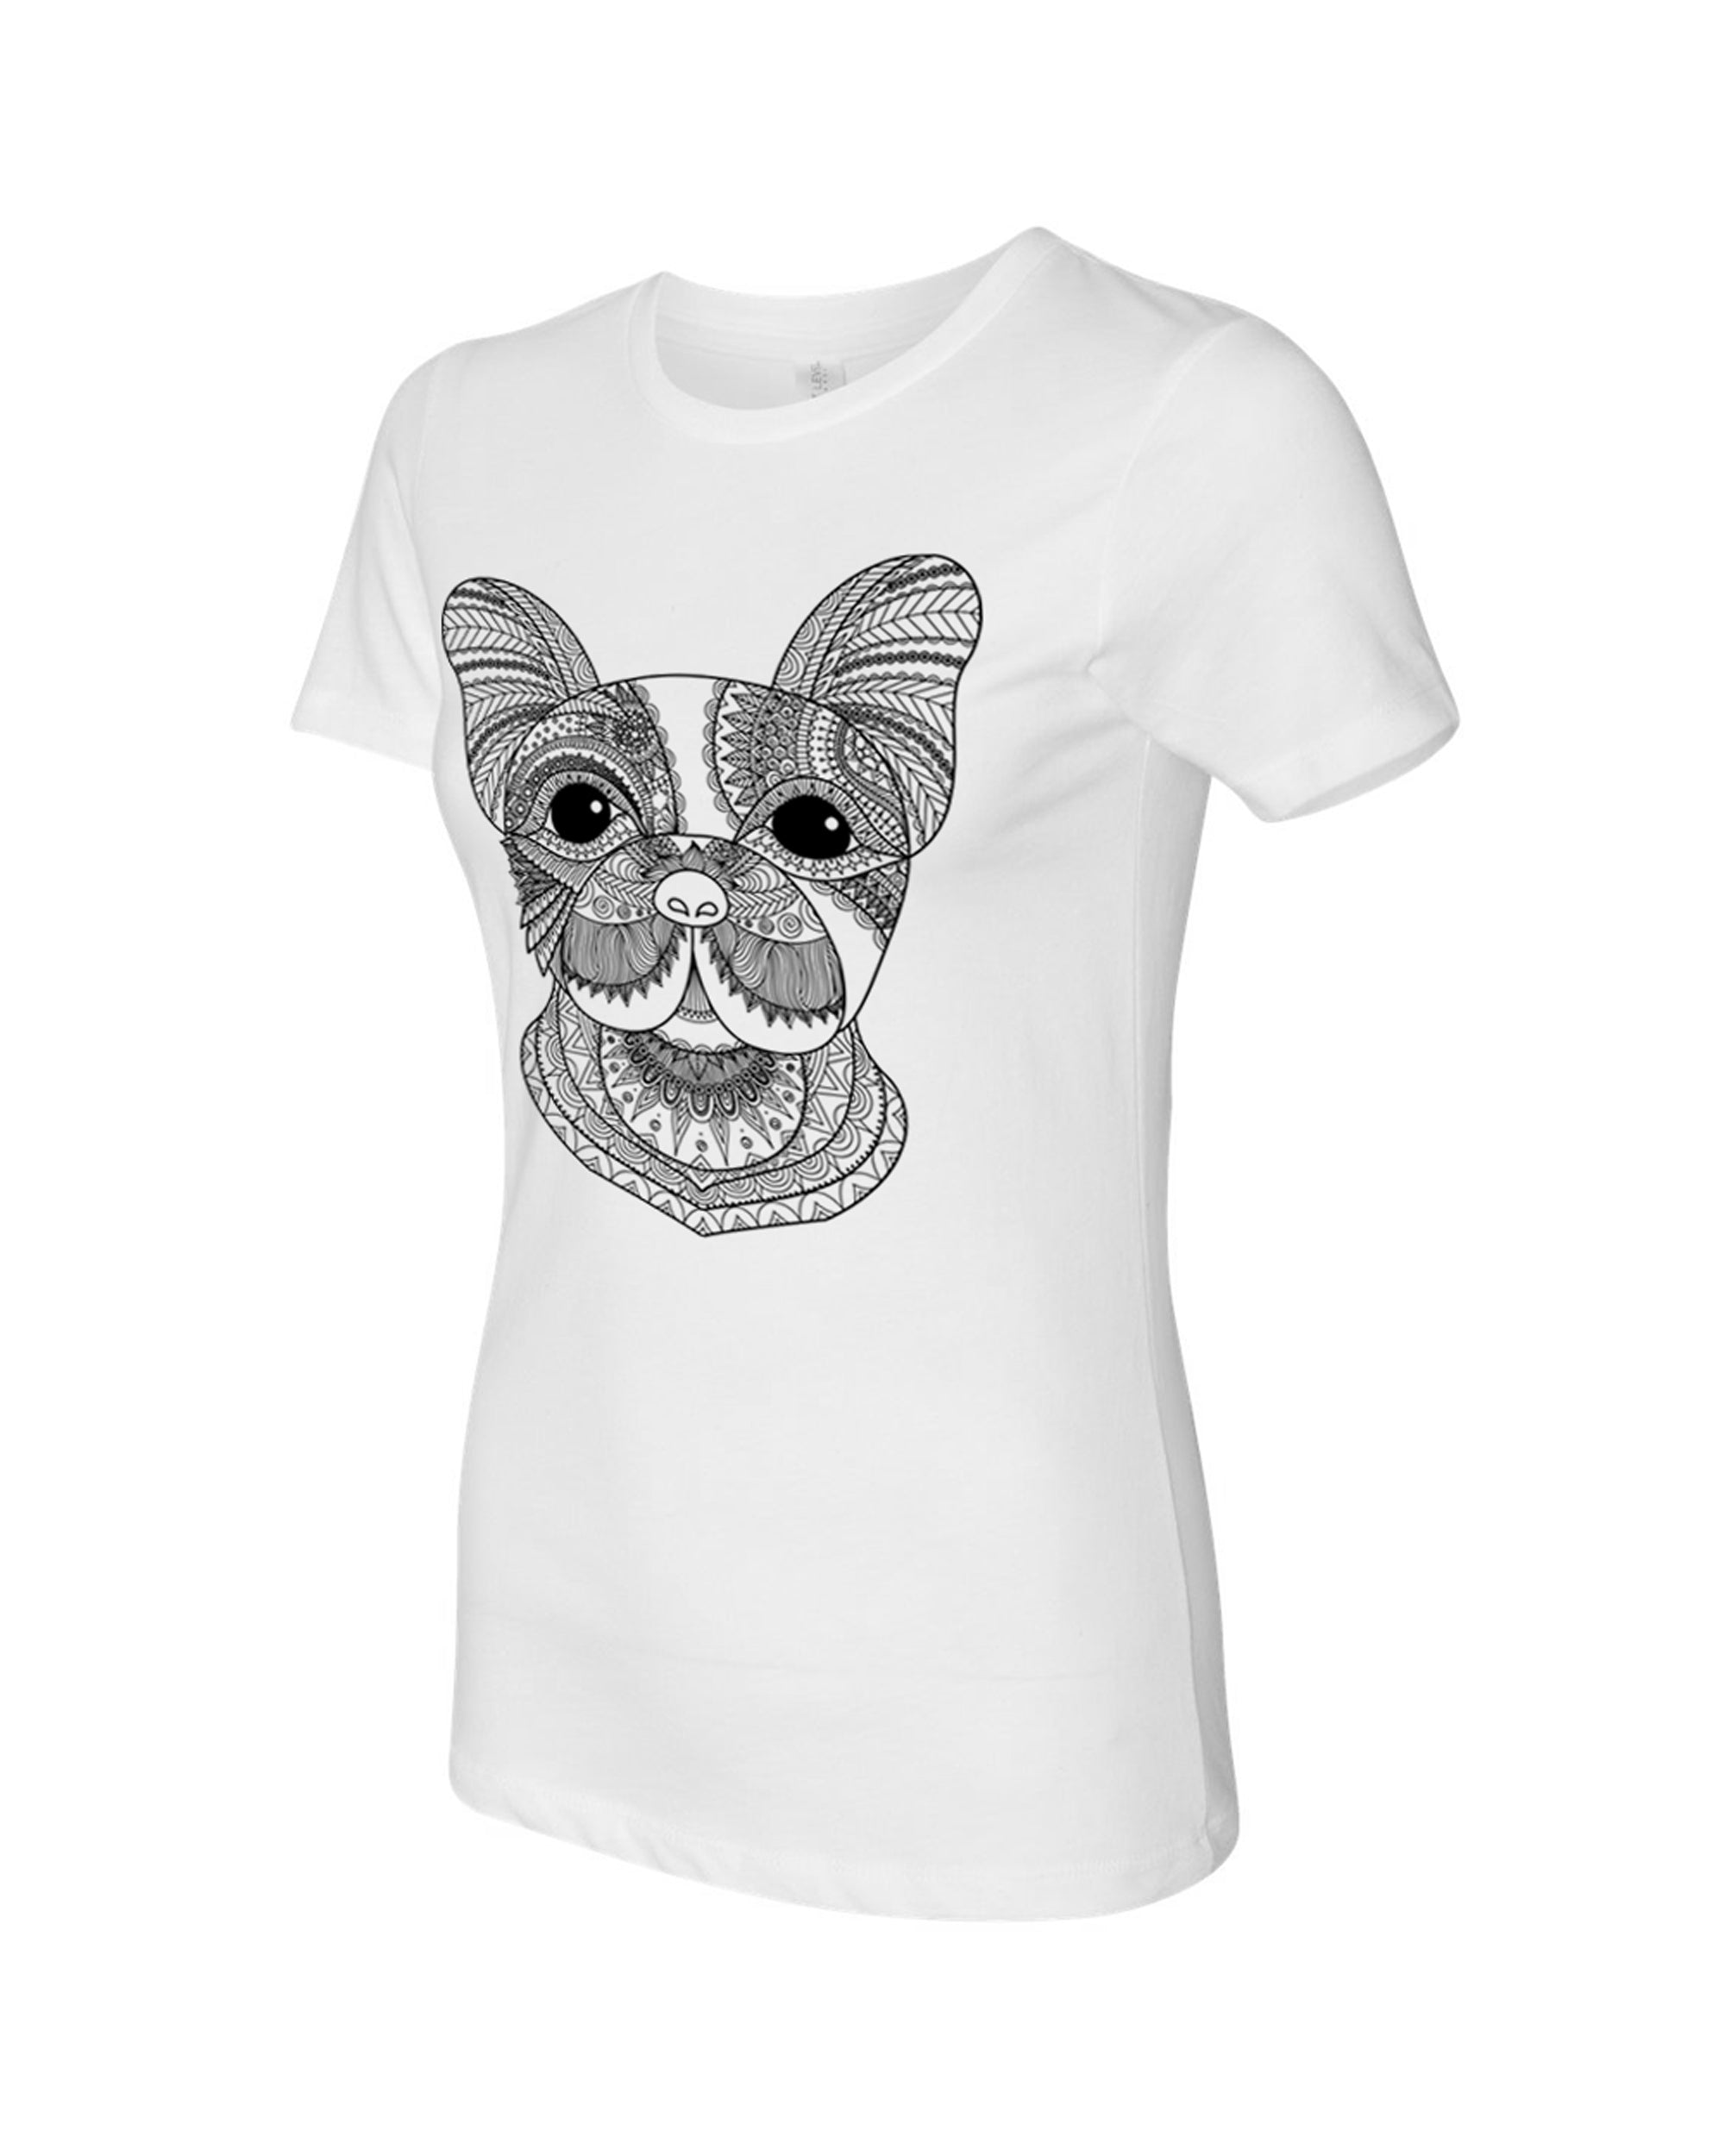 Women's Coloring Dog White T Shirt - Adorned By You